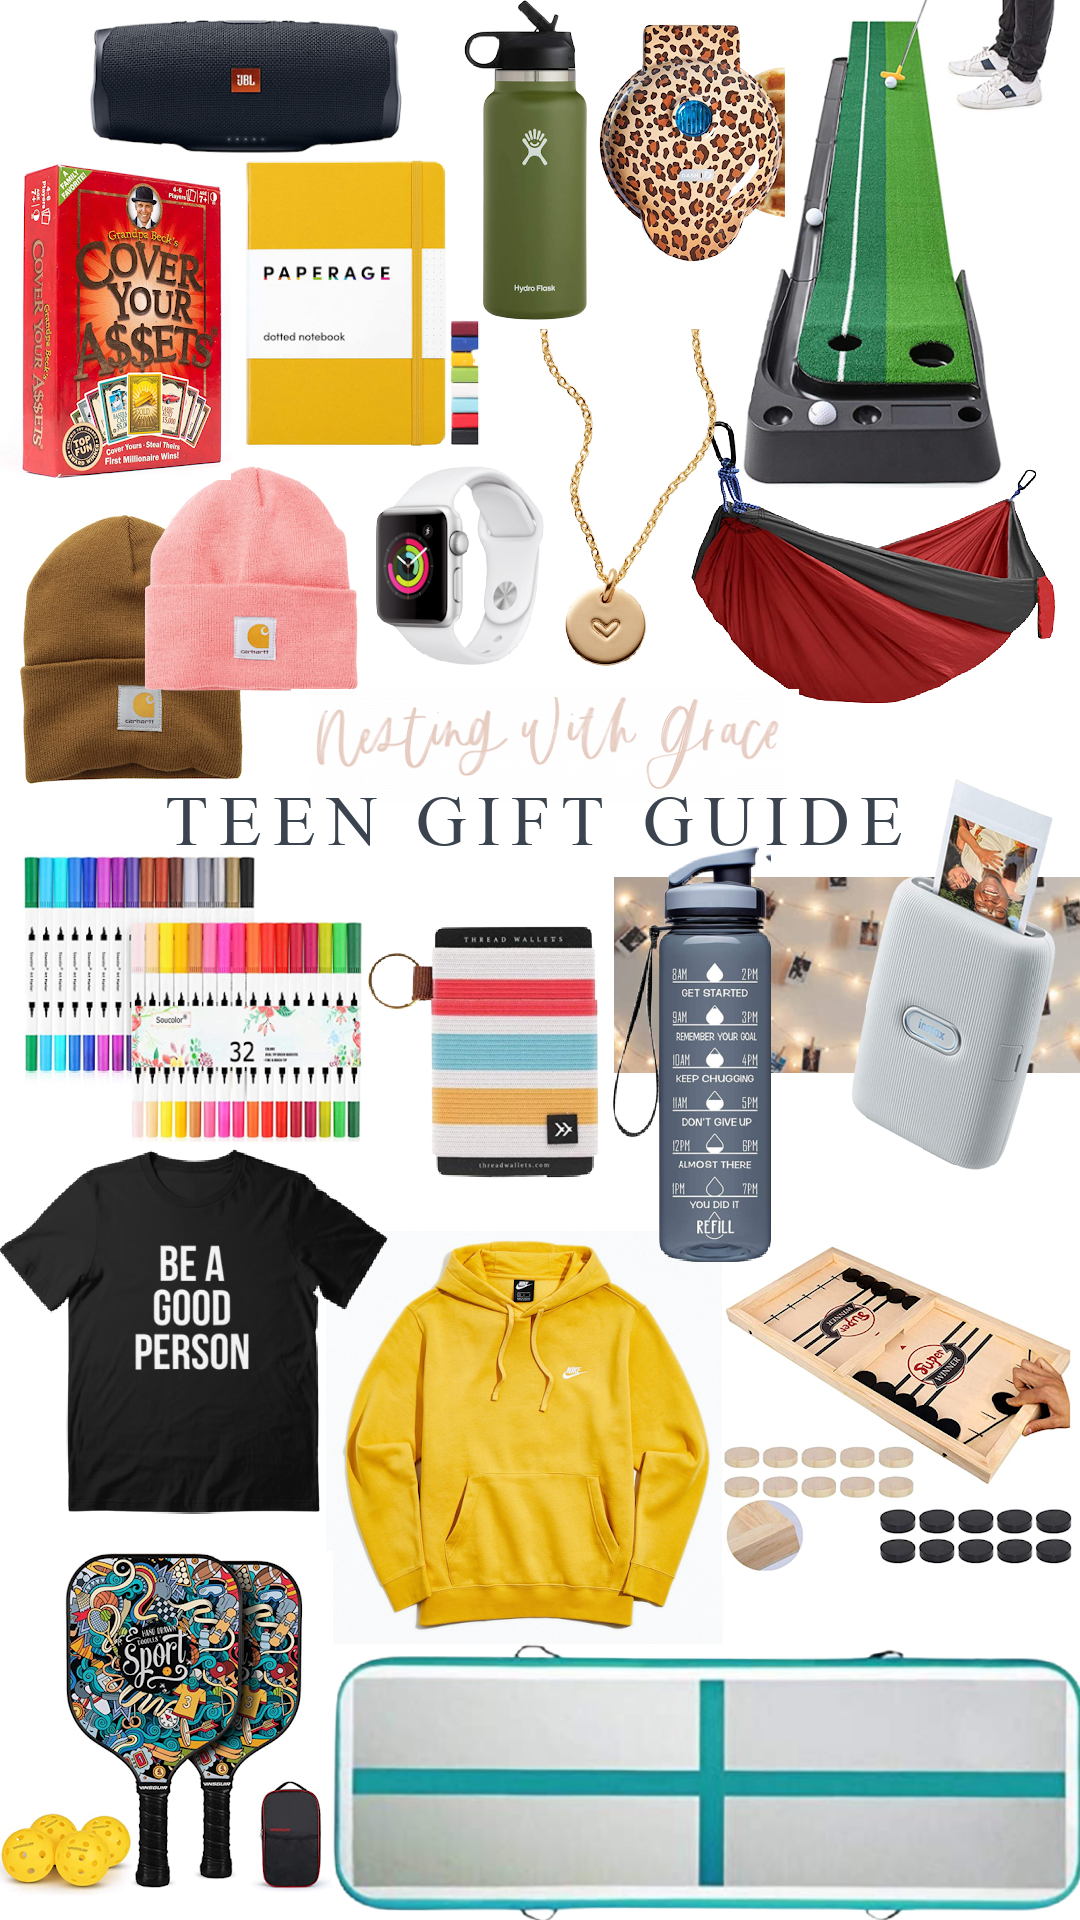 2019 Christmas Gift Guide for Her - Nesting With Grace